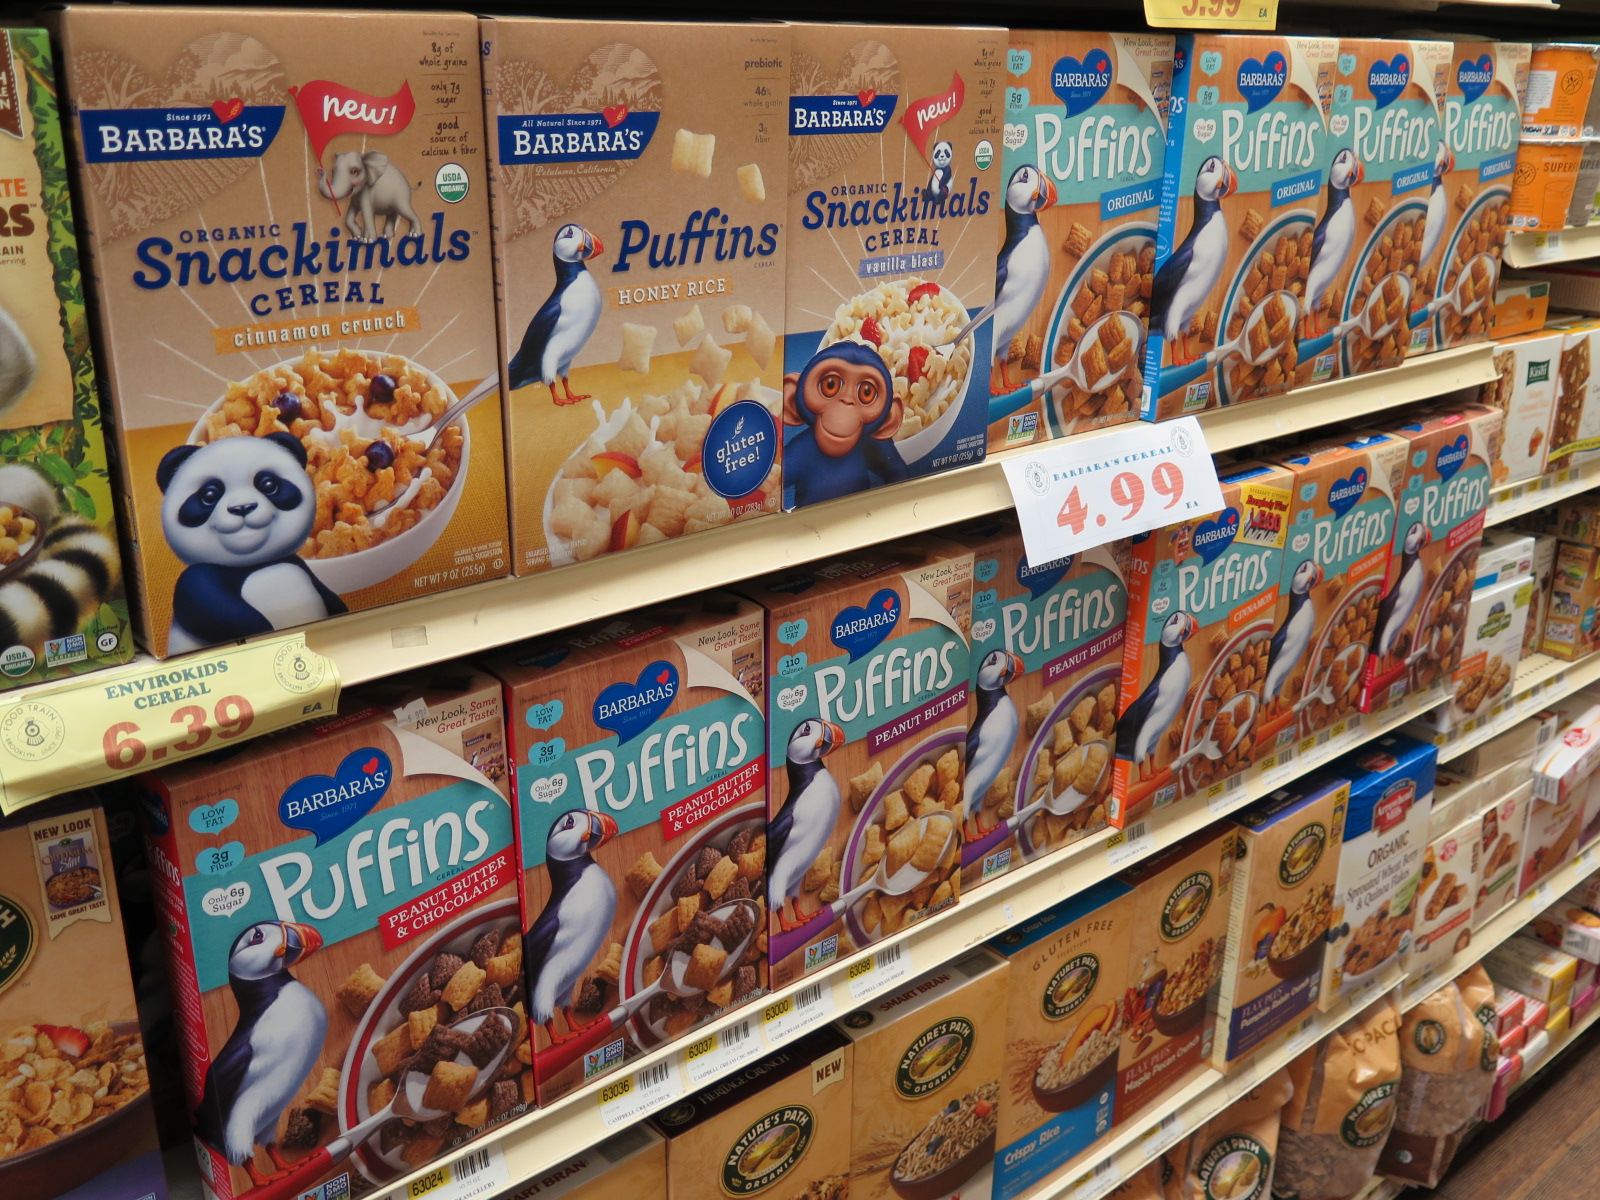 Barbara's Snackimals and Puffins Cereal